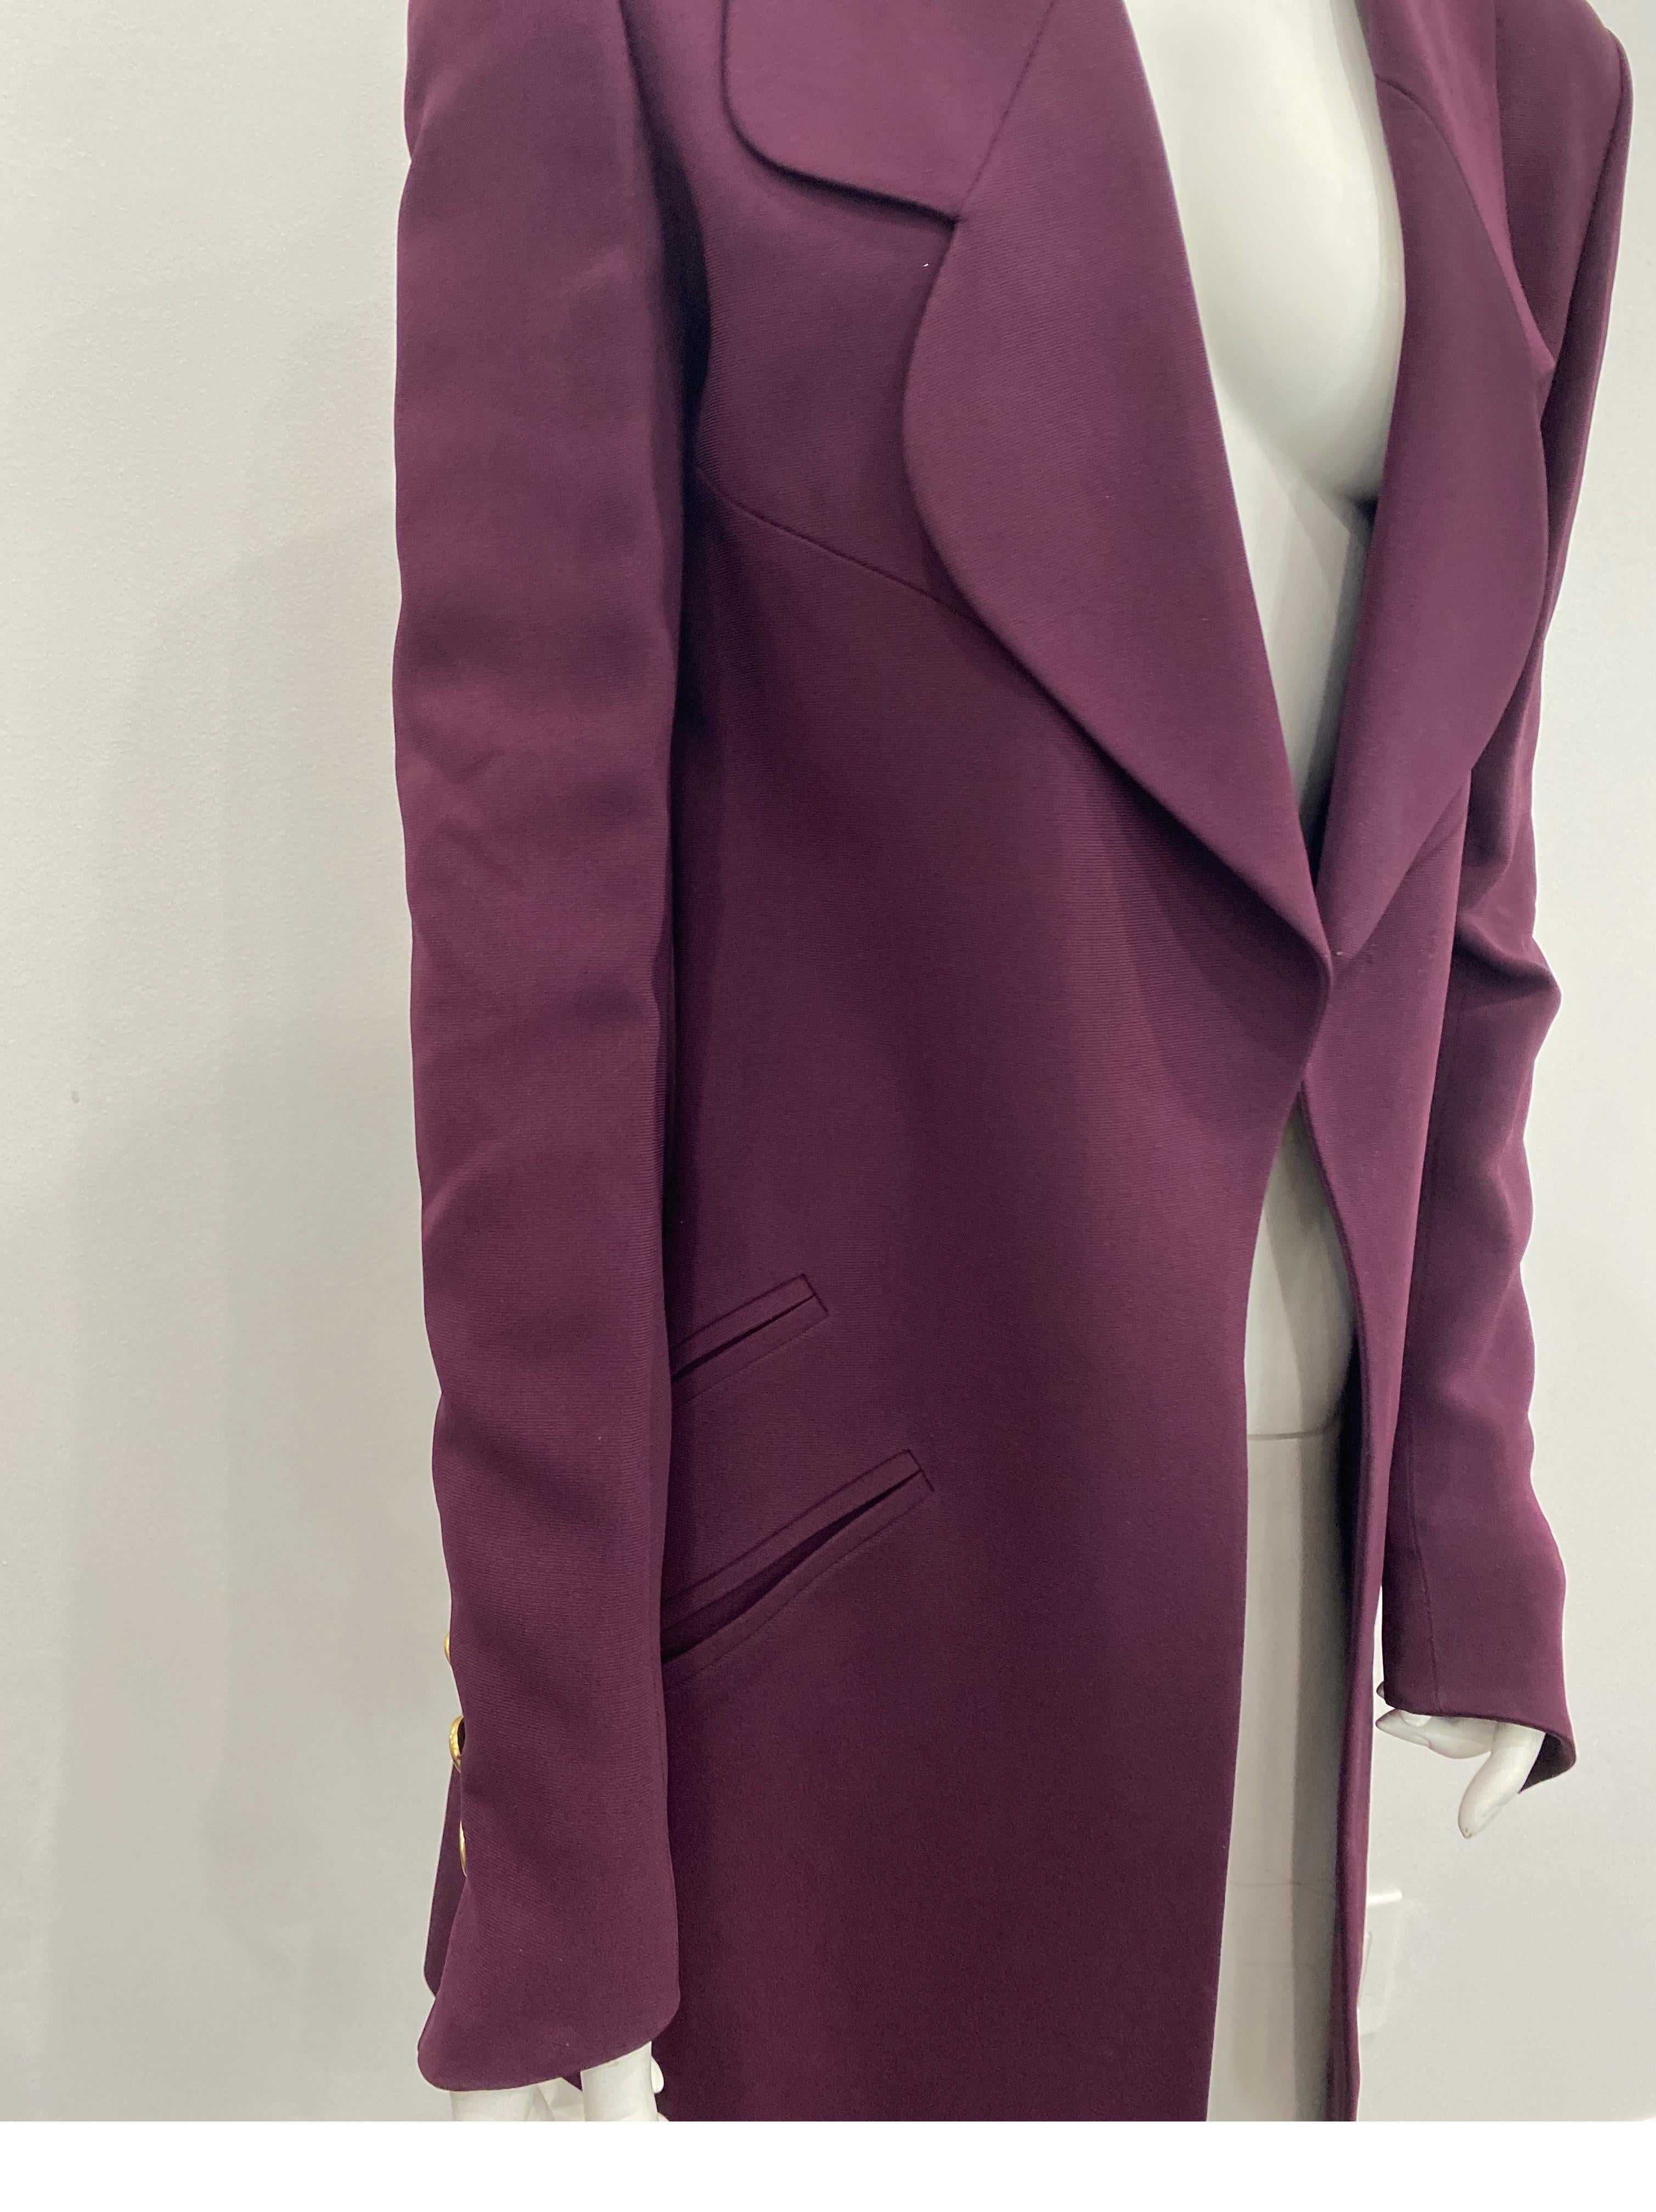 Karl Lagerfeld Eggplant 3/4 Coat - Size 36 For Sale 2